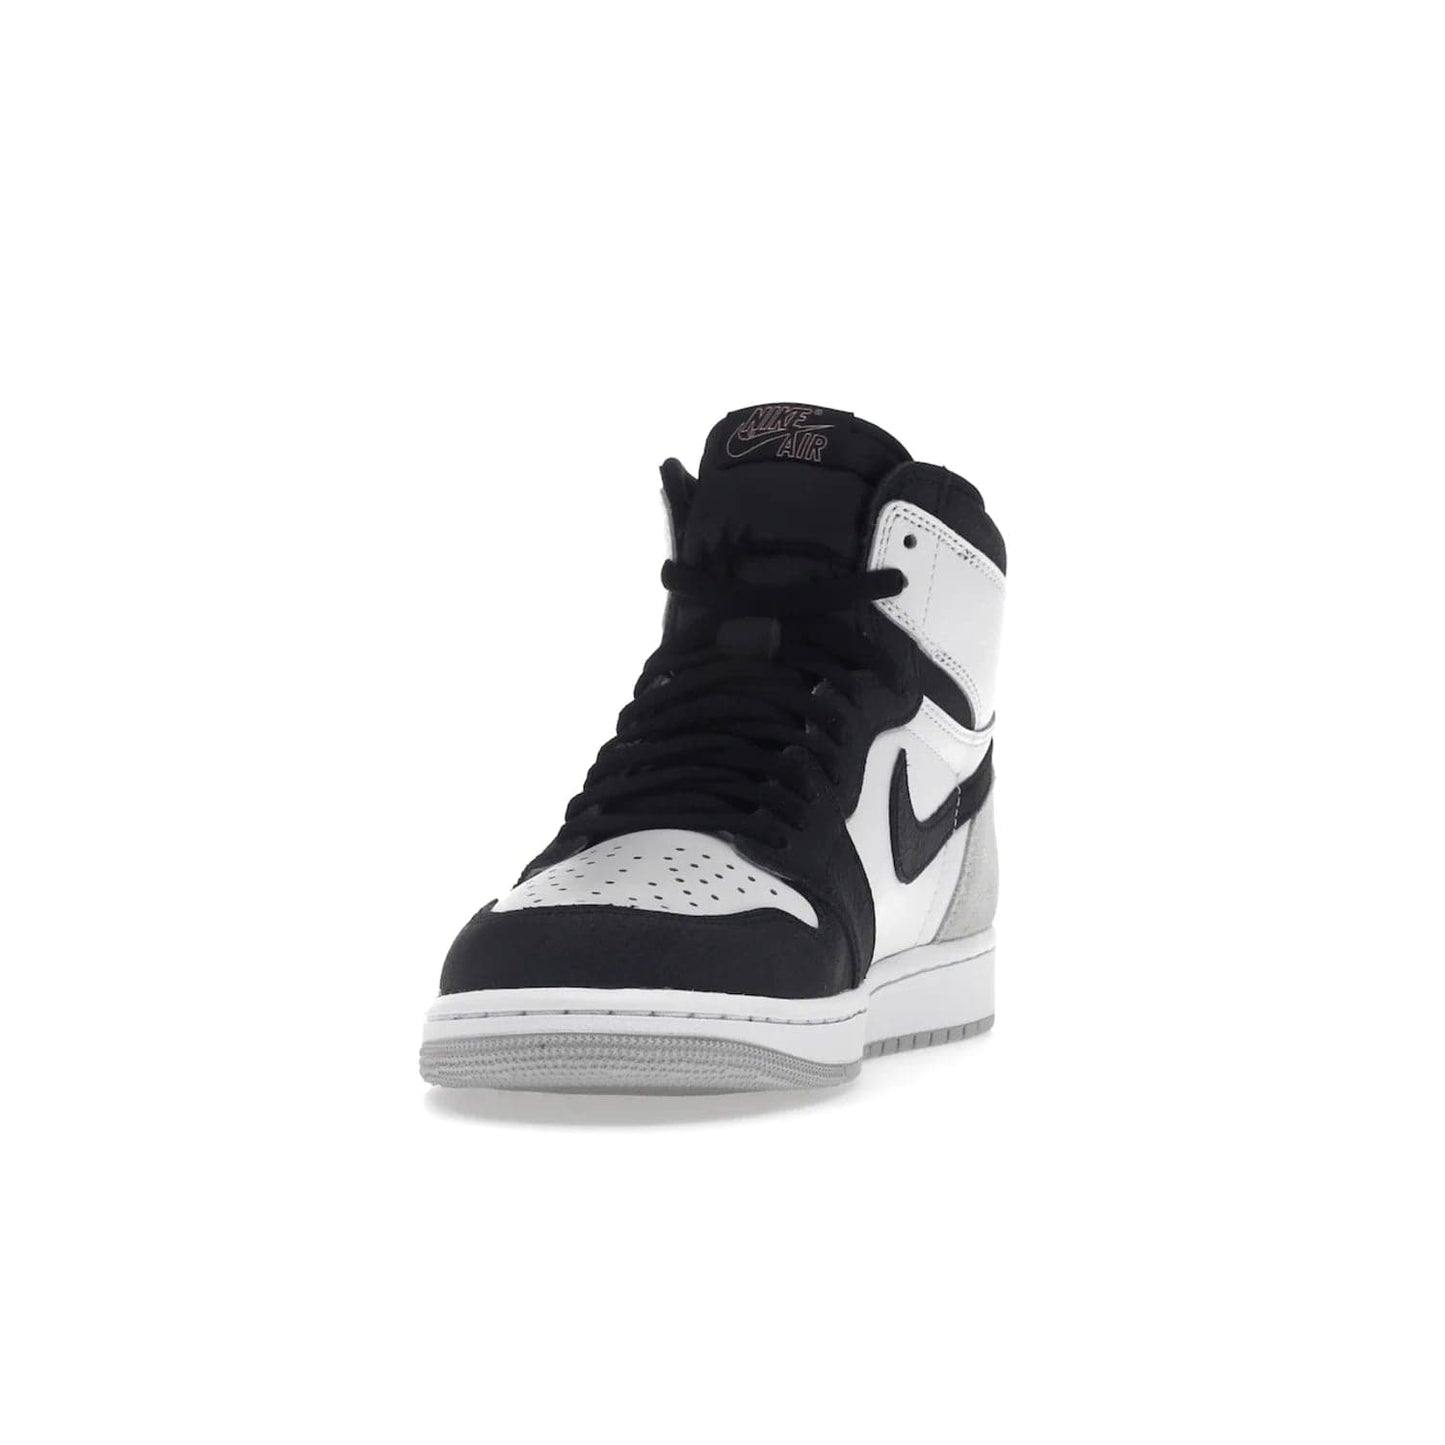 Jordan 1 Retro High OG Bleached Coral - Image 12 - Only at www.BallersClubKickz.com - Check out the latest AJ1 High OG Bleached Coral release, featuring white and black leather with grey overlays and a classic Nike Air cushioning. Shop now!